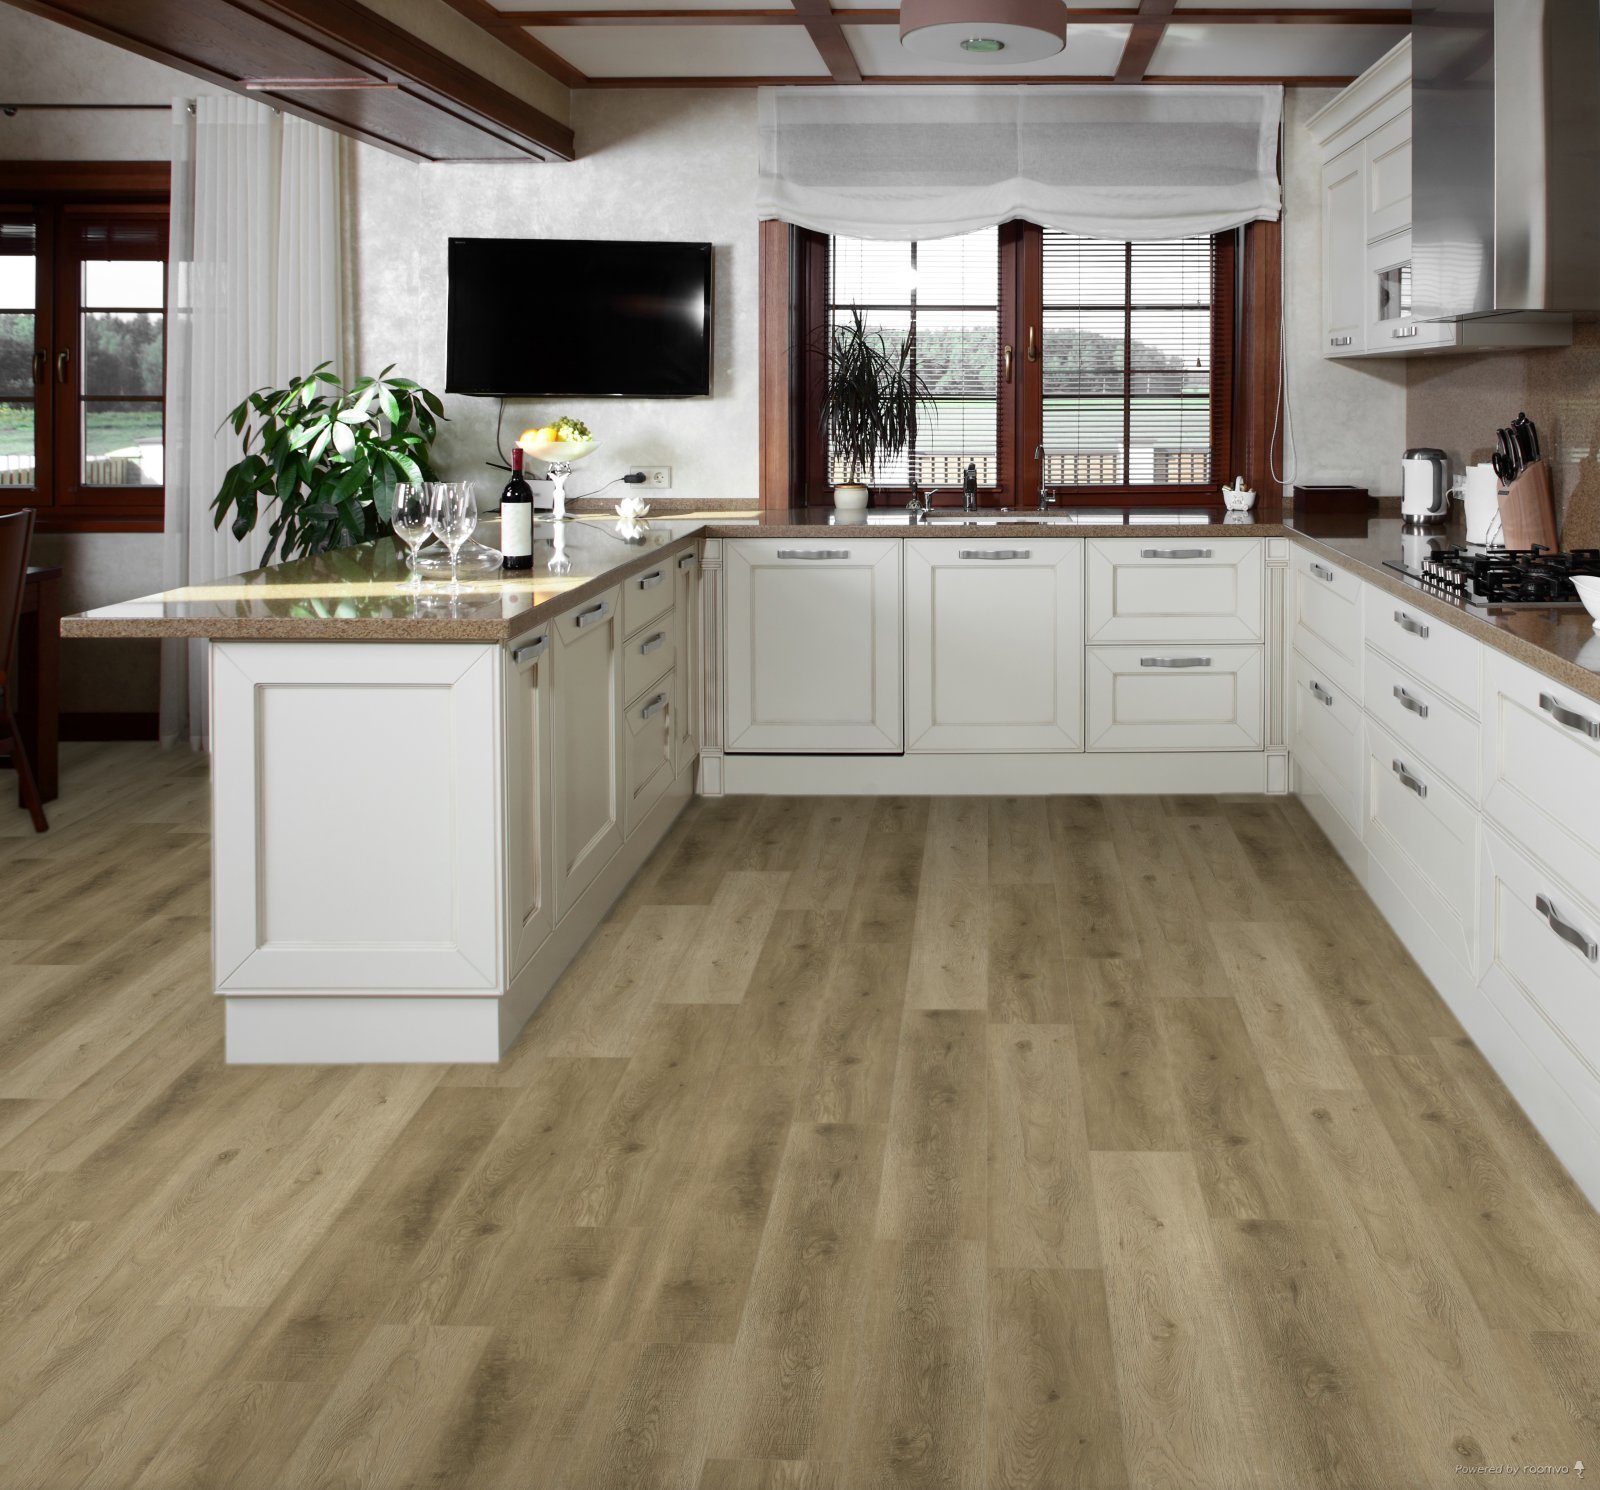 Horizen Flooring presents to you a picture of a quality wide plank Sessile luxury vinyl plank. NovoCore Premium EIR collection features a wide range of colors & designs that will compliment any interior. Natural wood grain synchronized surface allow for an authentic hardwood look & feel. This collection features a 0.25″ / 6.5 mm overall thickness and a durable 22 mil / 0.55 mm wear layer for residential and commercial applications.